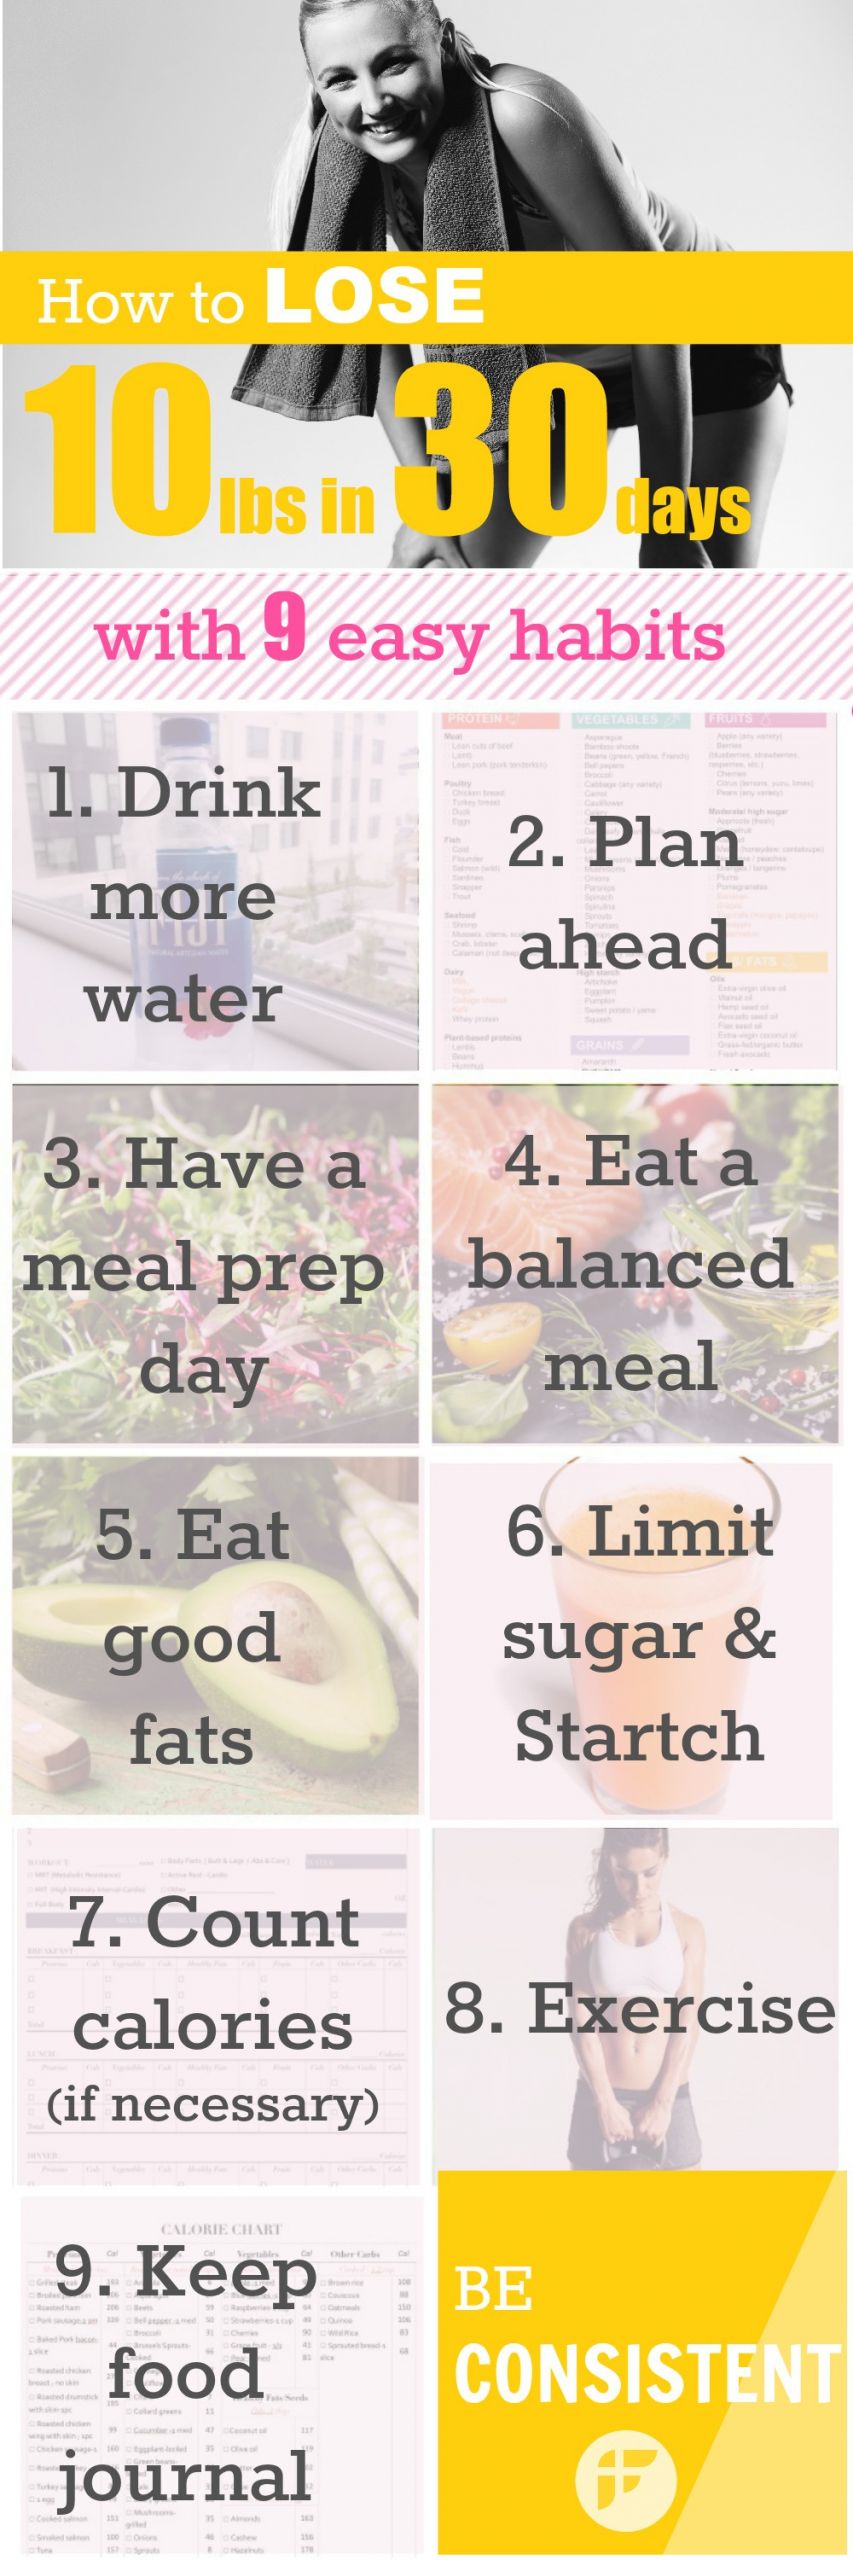 How To Lose Weight In A Week 10 Pounds
 How to Lose 10 Pounds in a Month 9 Simple Steps Based on